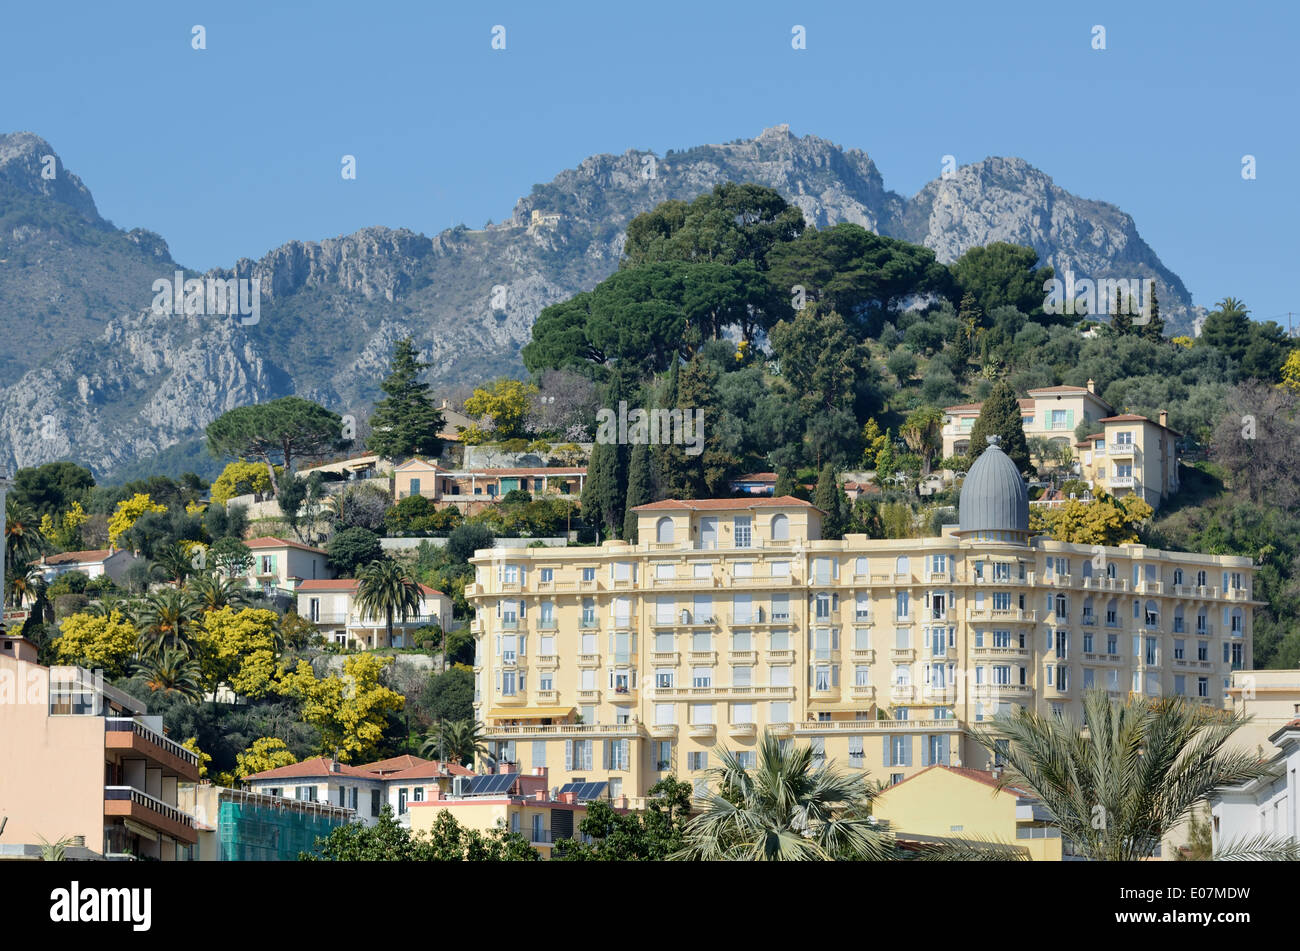 Belle Epoch or Belle Epoque Architecture, and Lower Alps or Rocky Hillside Behind Menton Alpes-Maritimes France Stock Photo